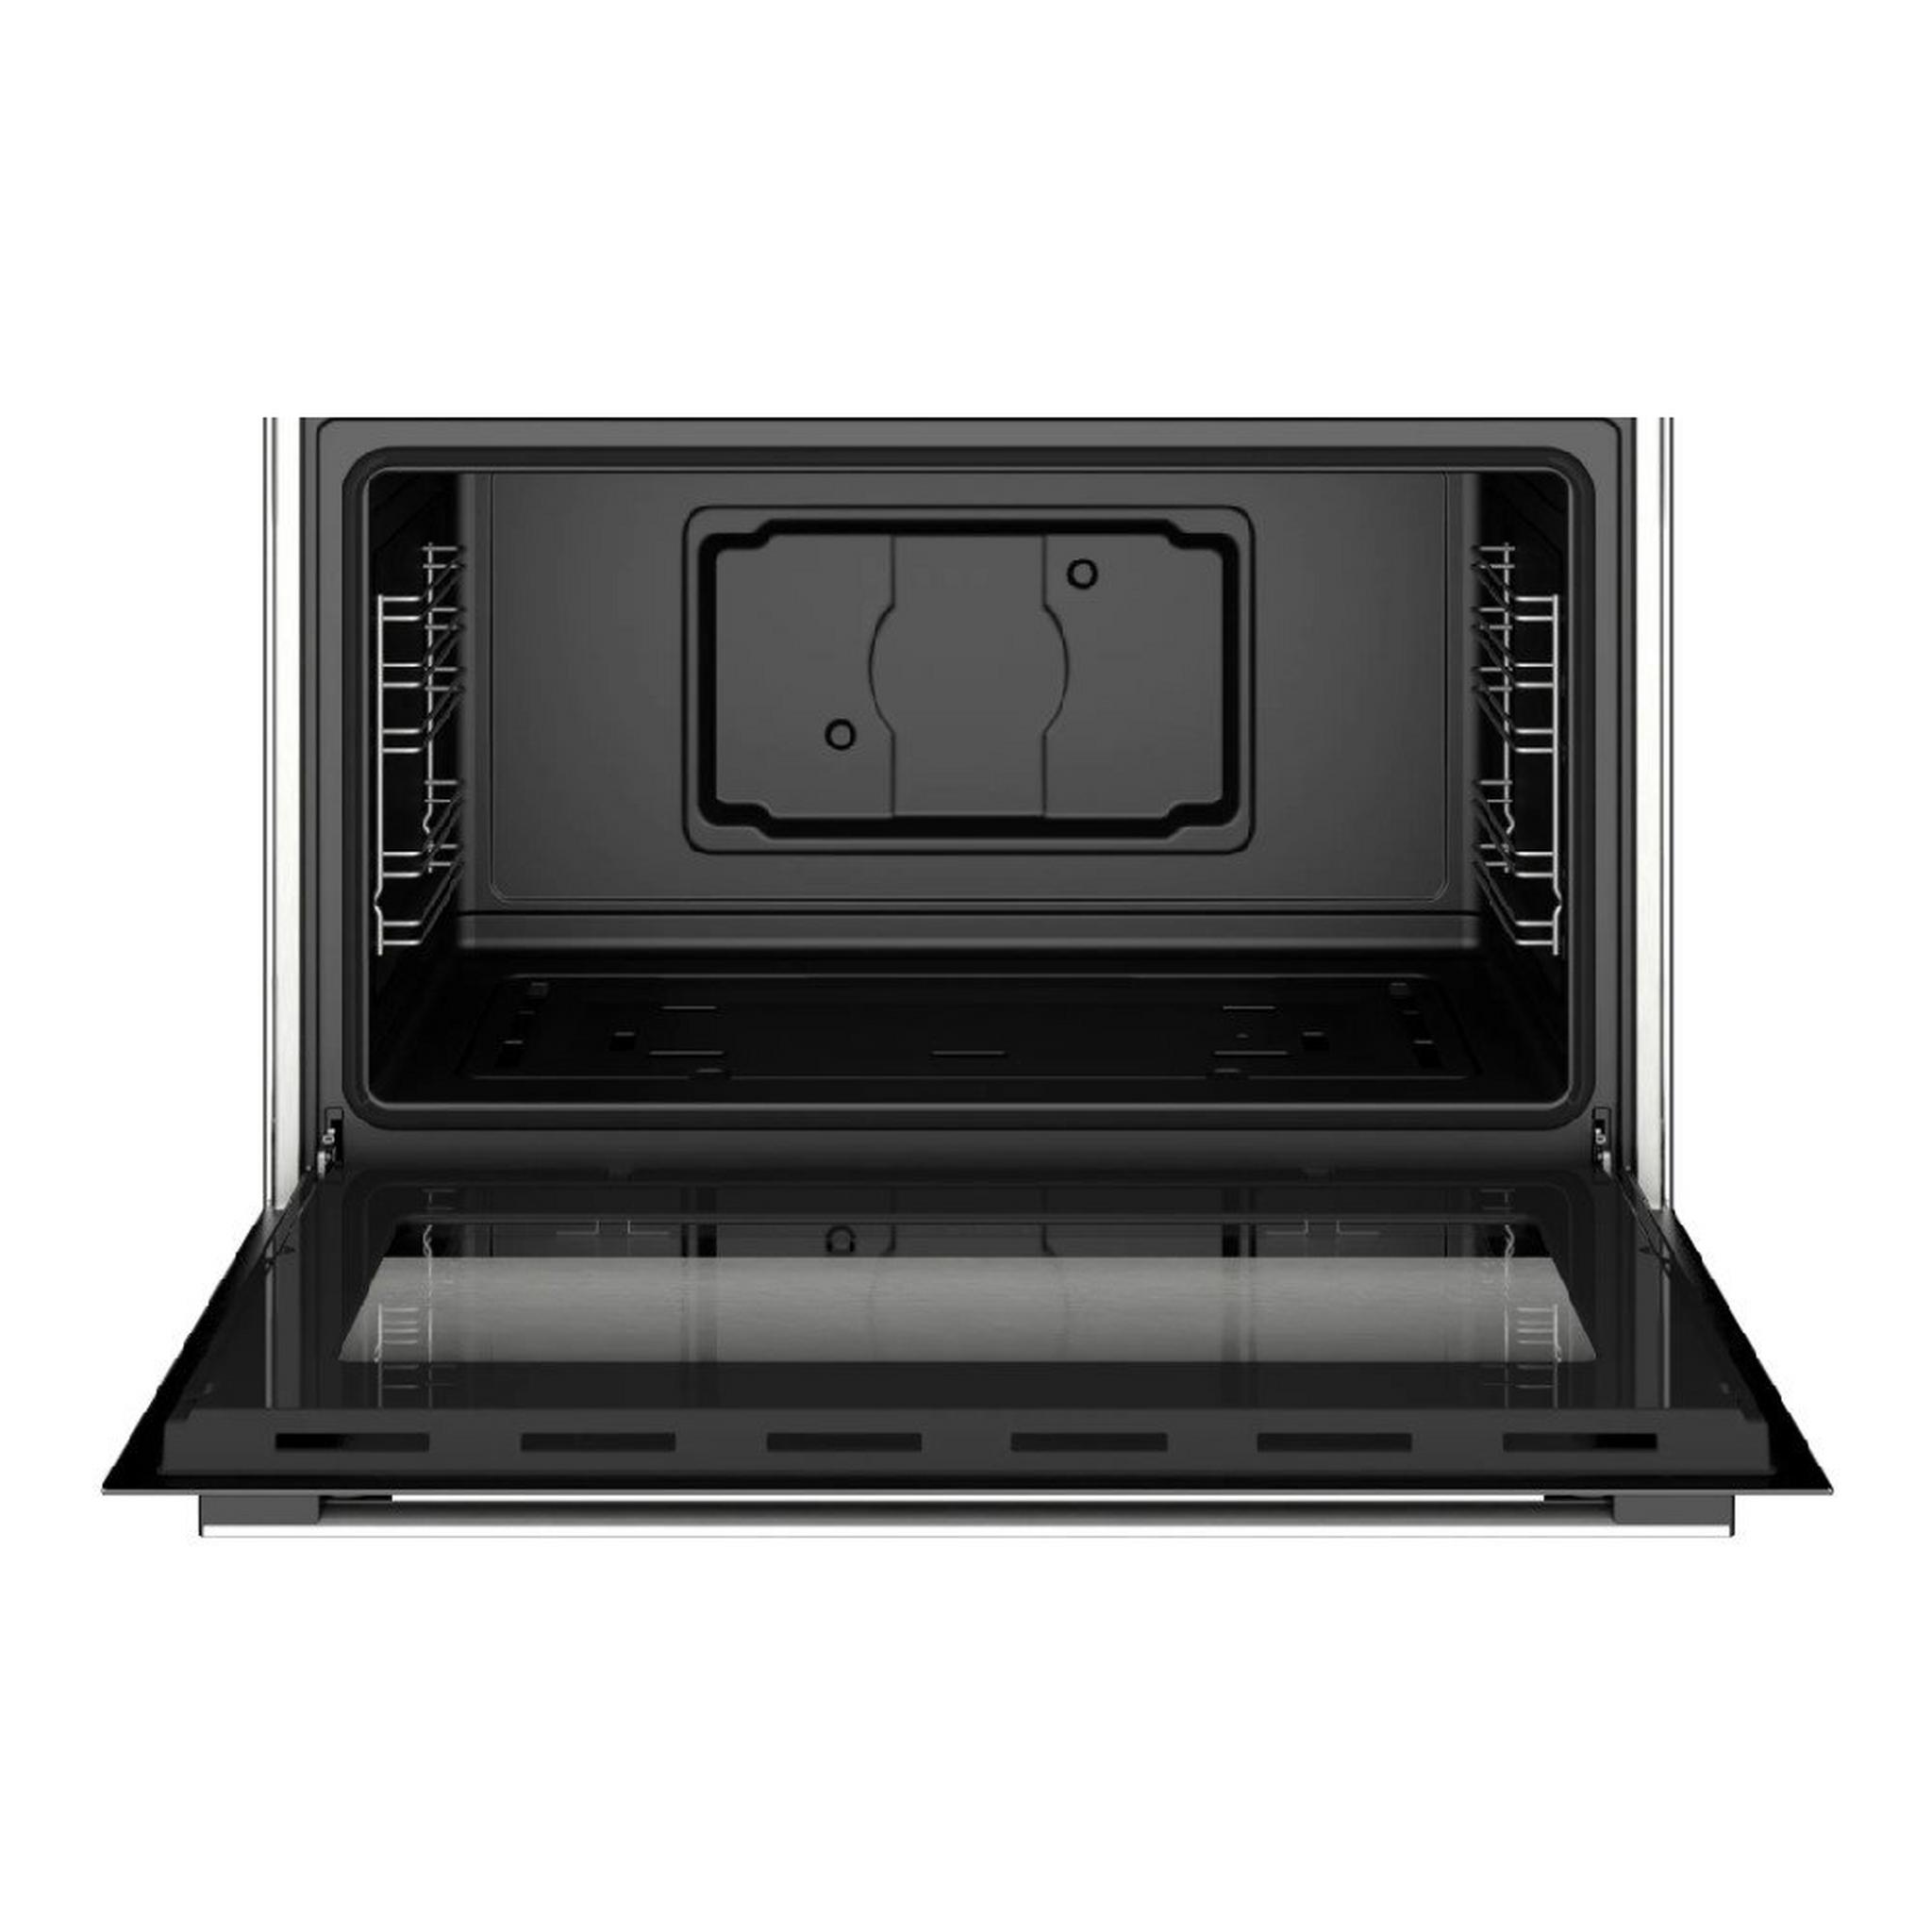 Bosch Series-2 5 Burners Gas Cooker, 90x60cm, HGV1E0U50M - Stainless Steel